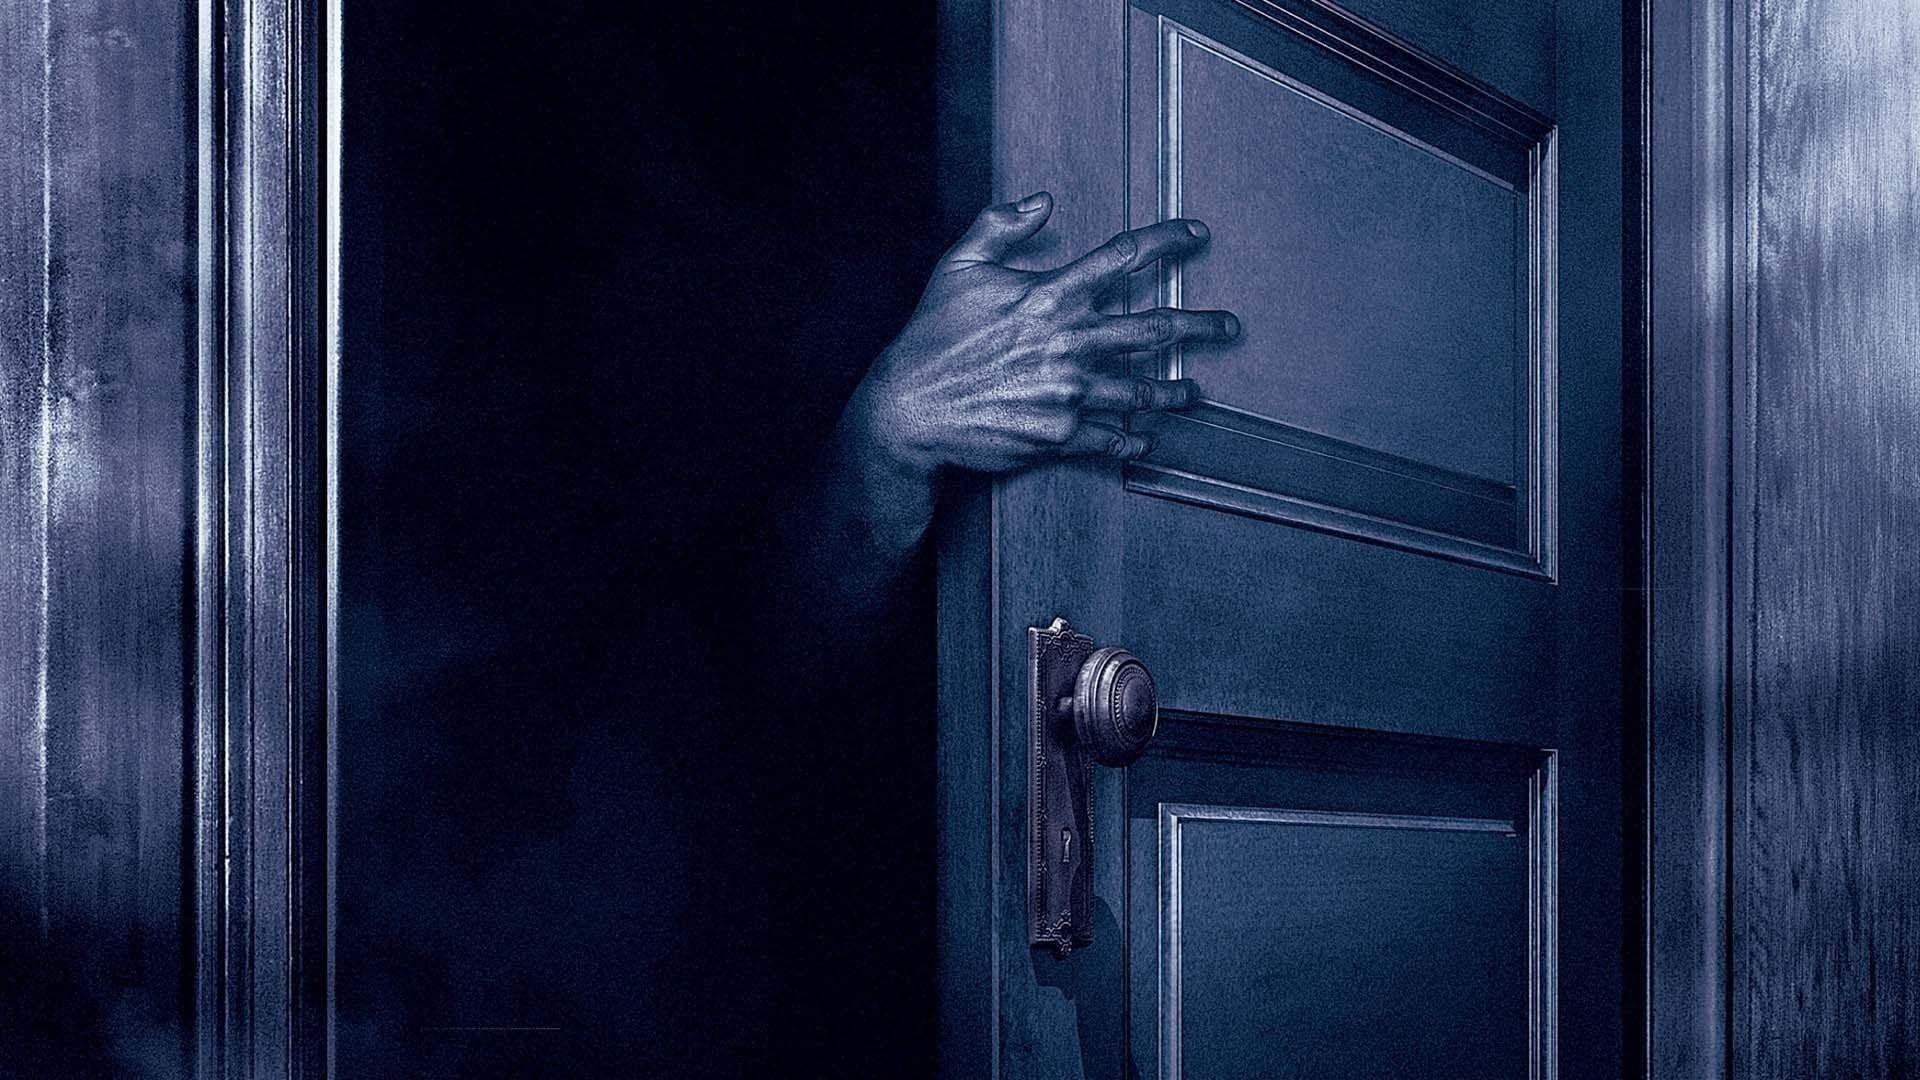 A Quiet Place' Writers Adapting Stephen King's Short Story 'The Boogeyman'!  - Bloody Disgusting